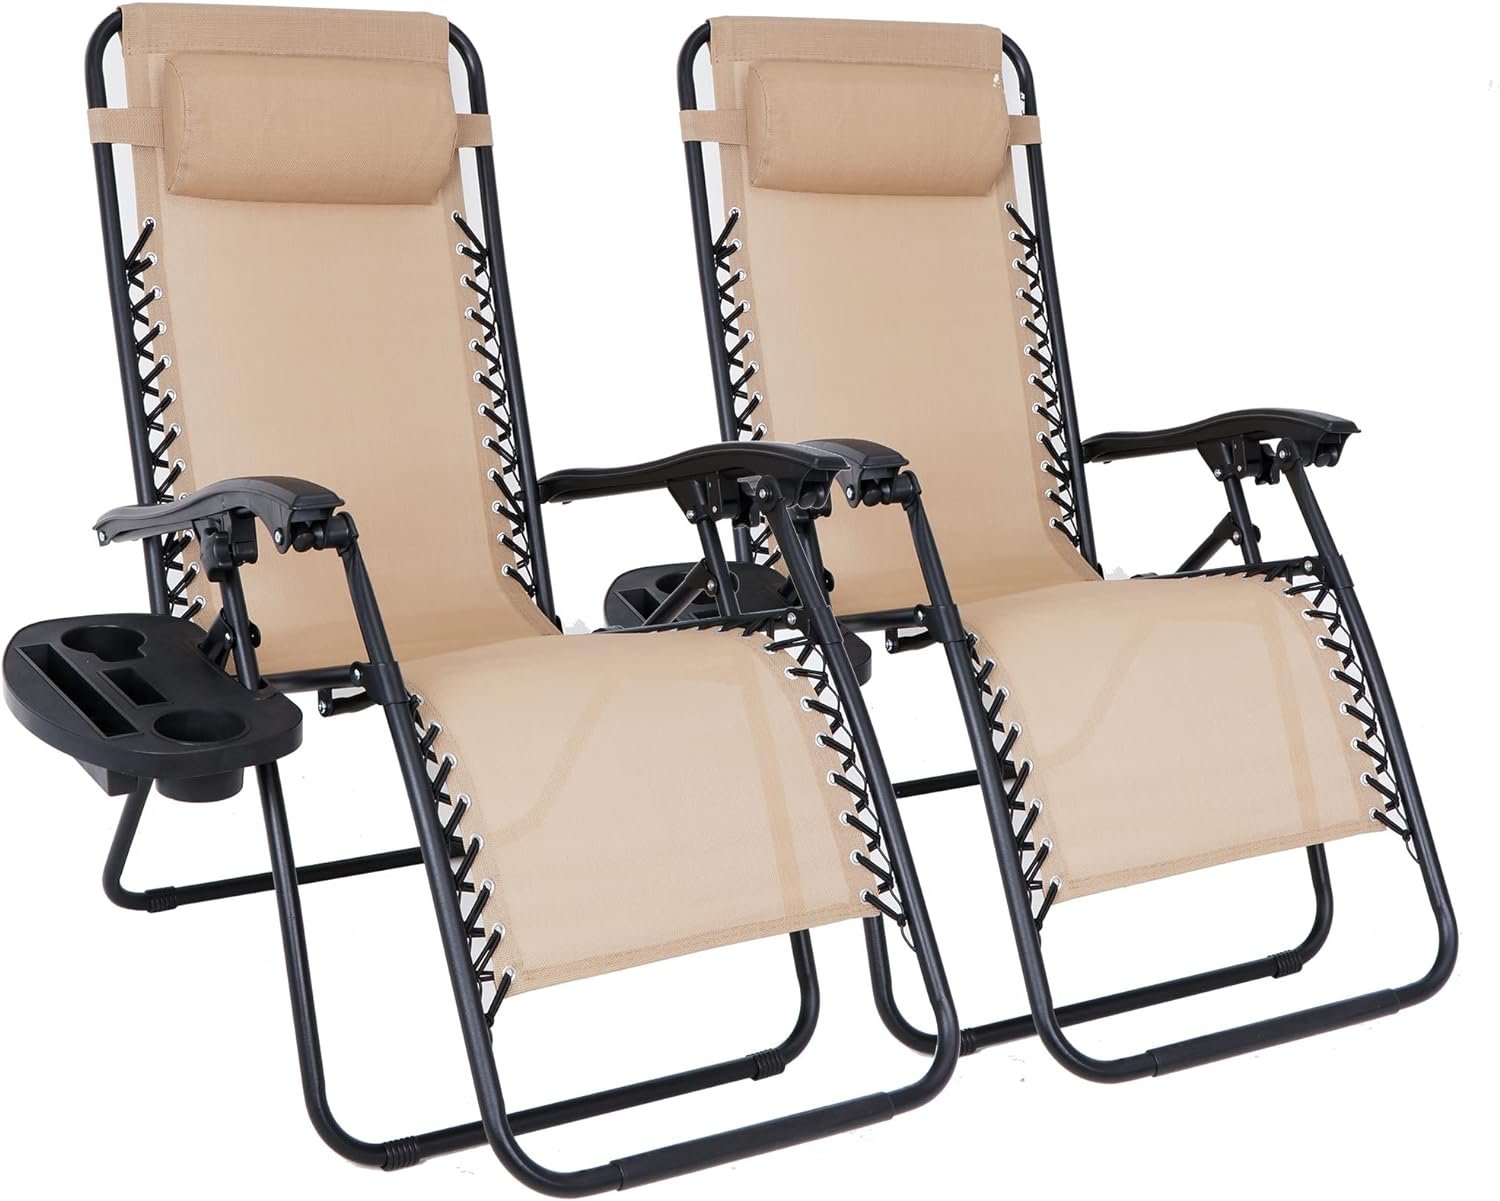 SUPER DEAL Zero Gravity Lounge Chair Review